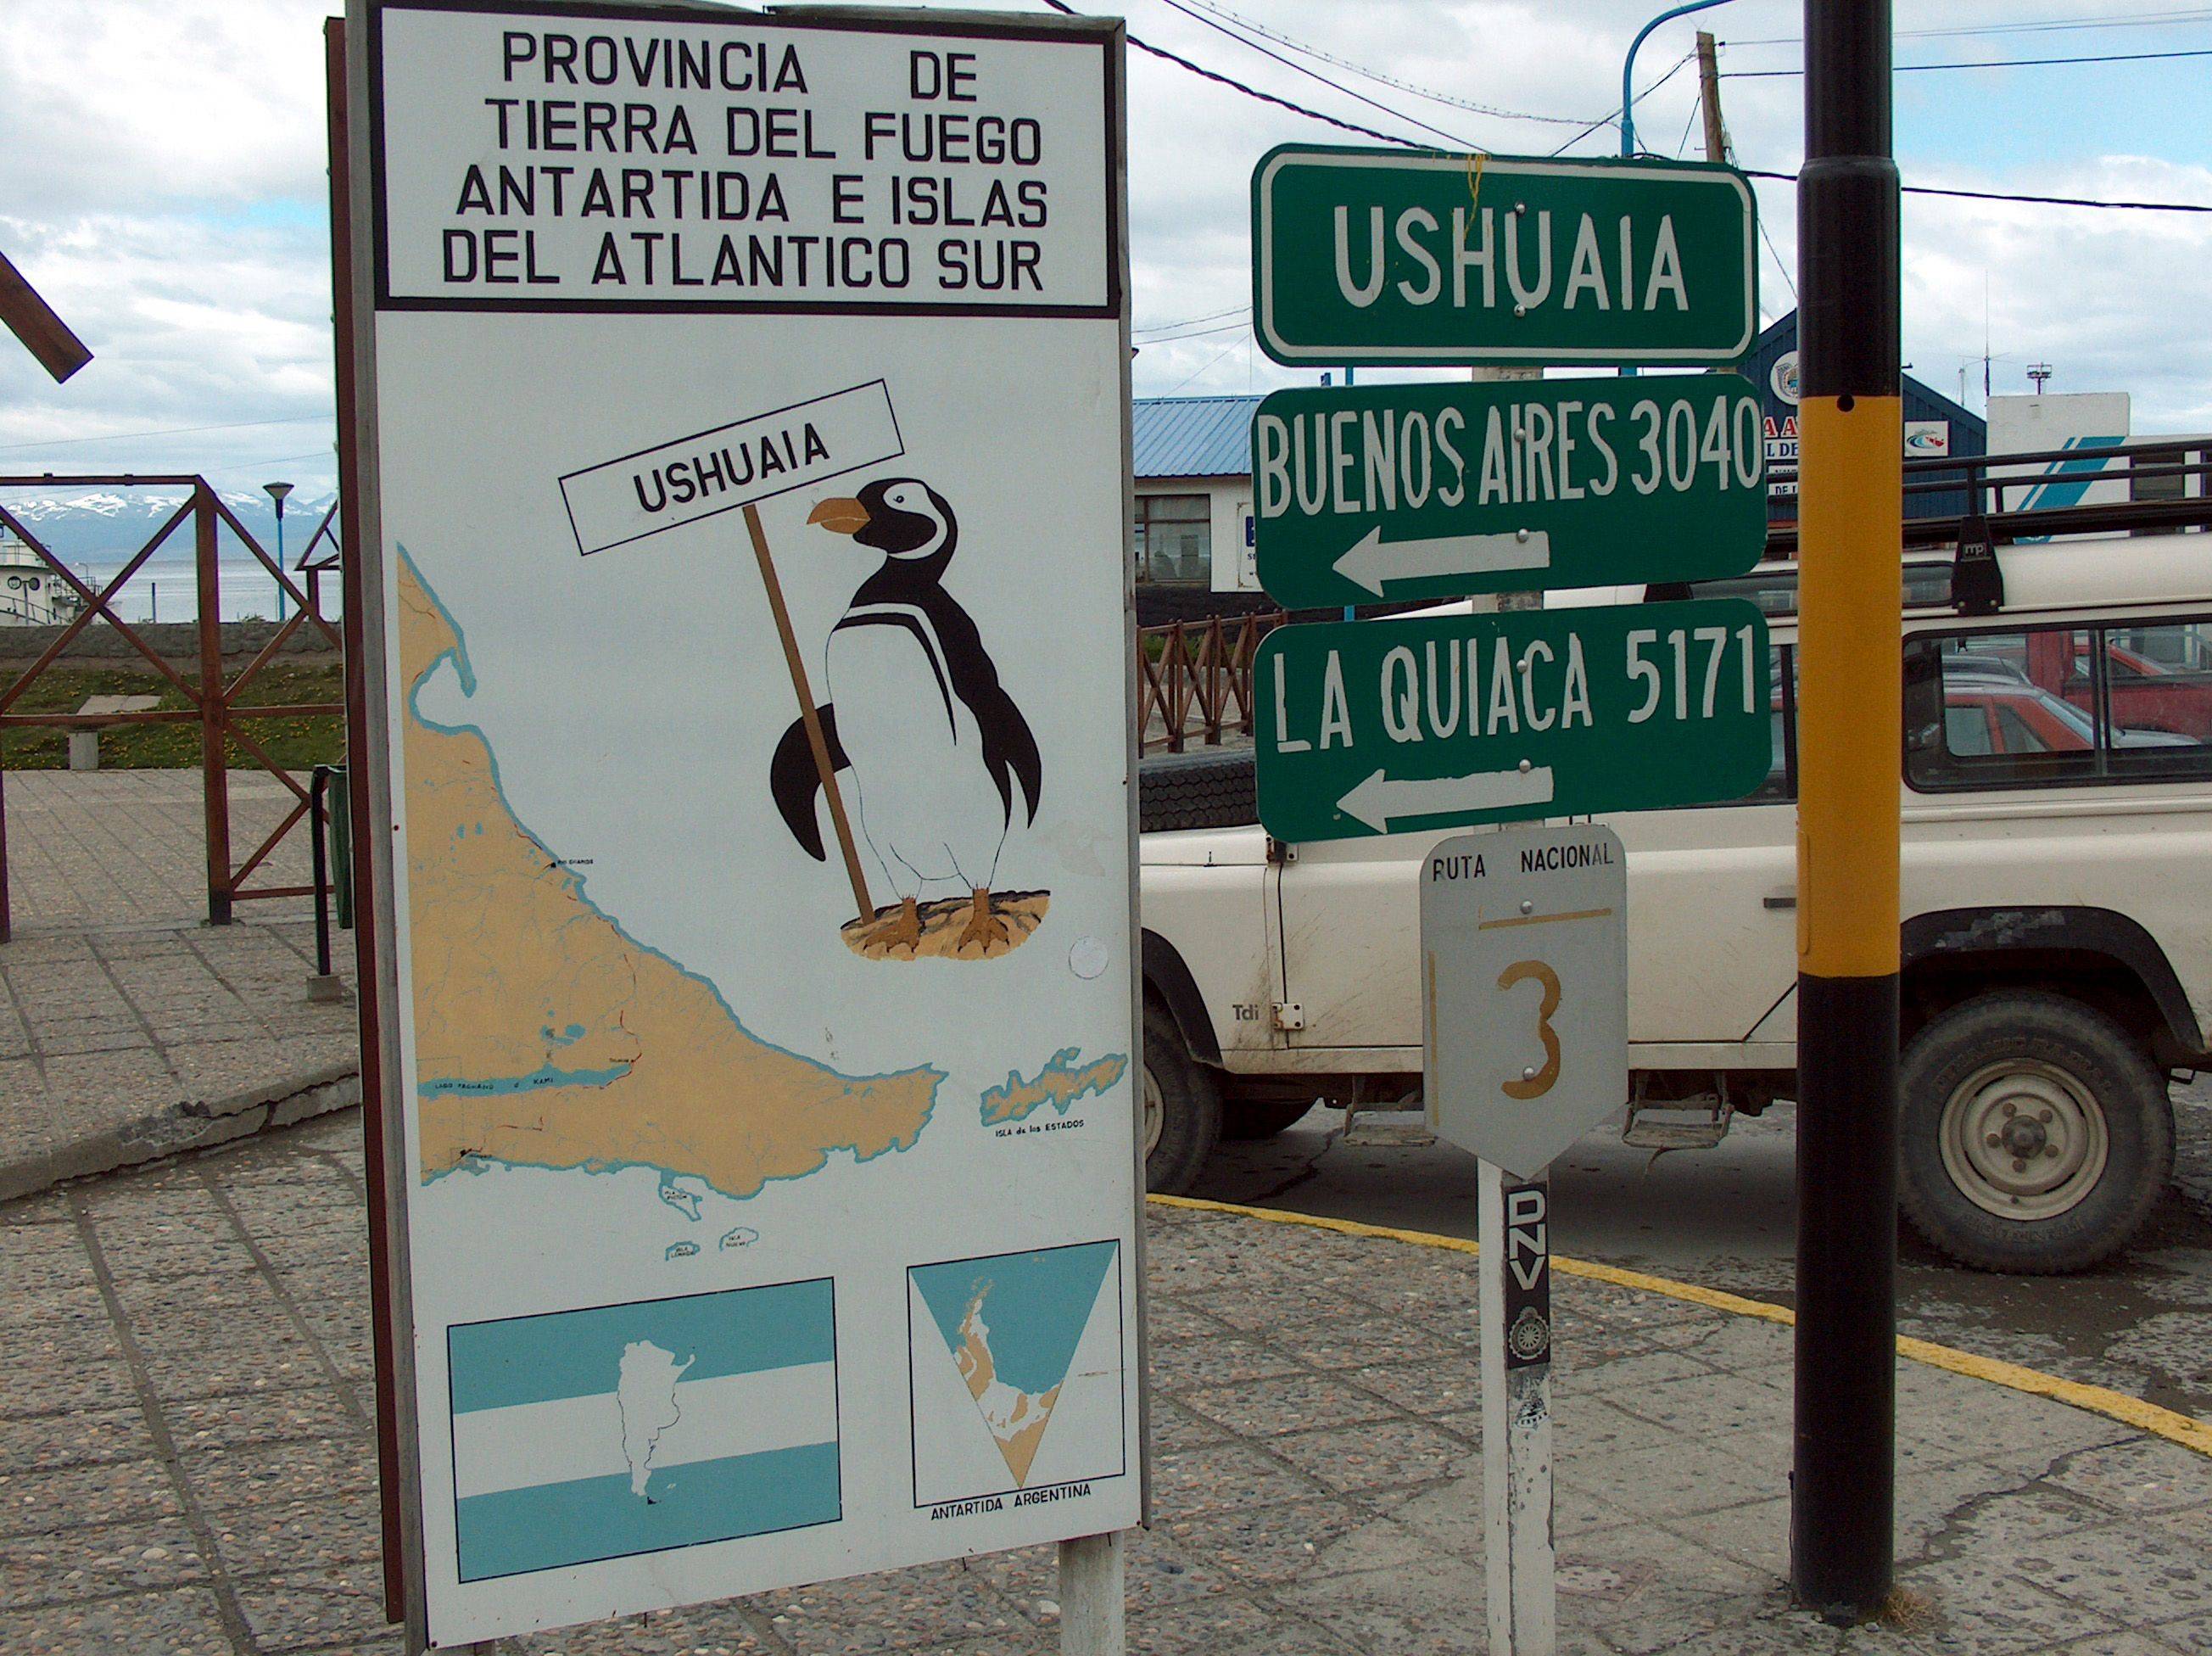 ​Ankunft in Ushuaia – Buenos Aires